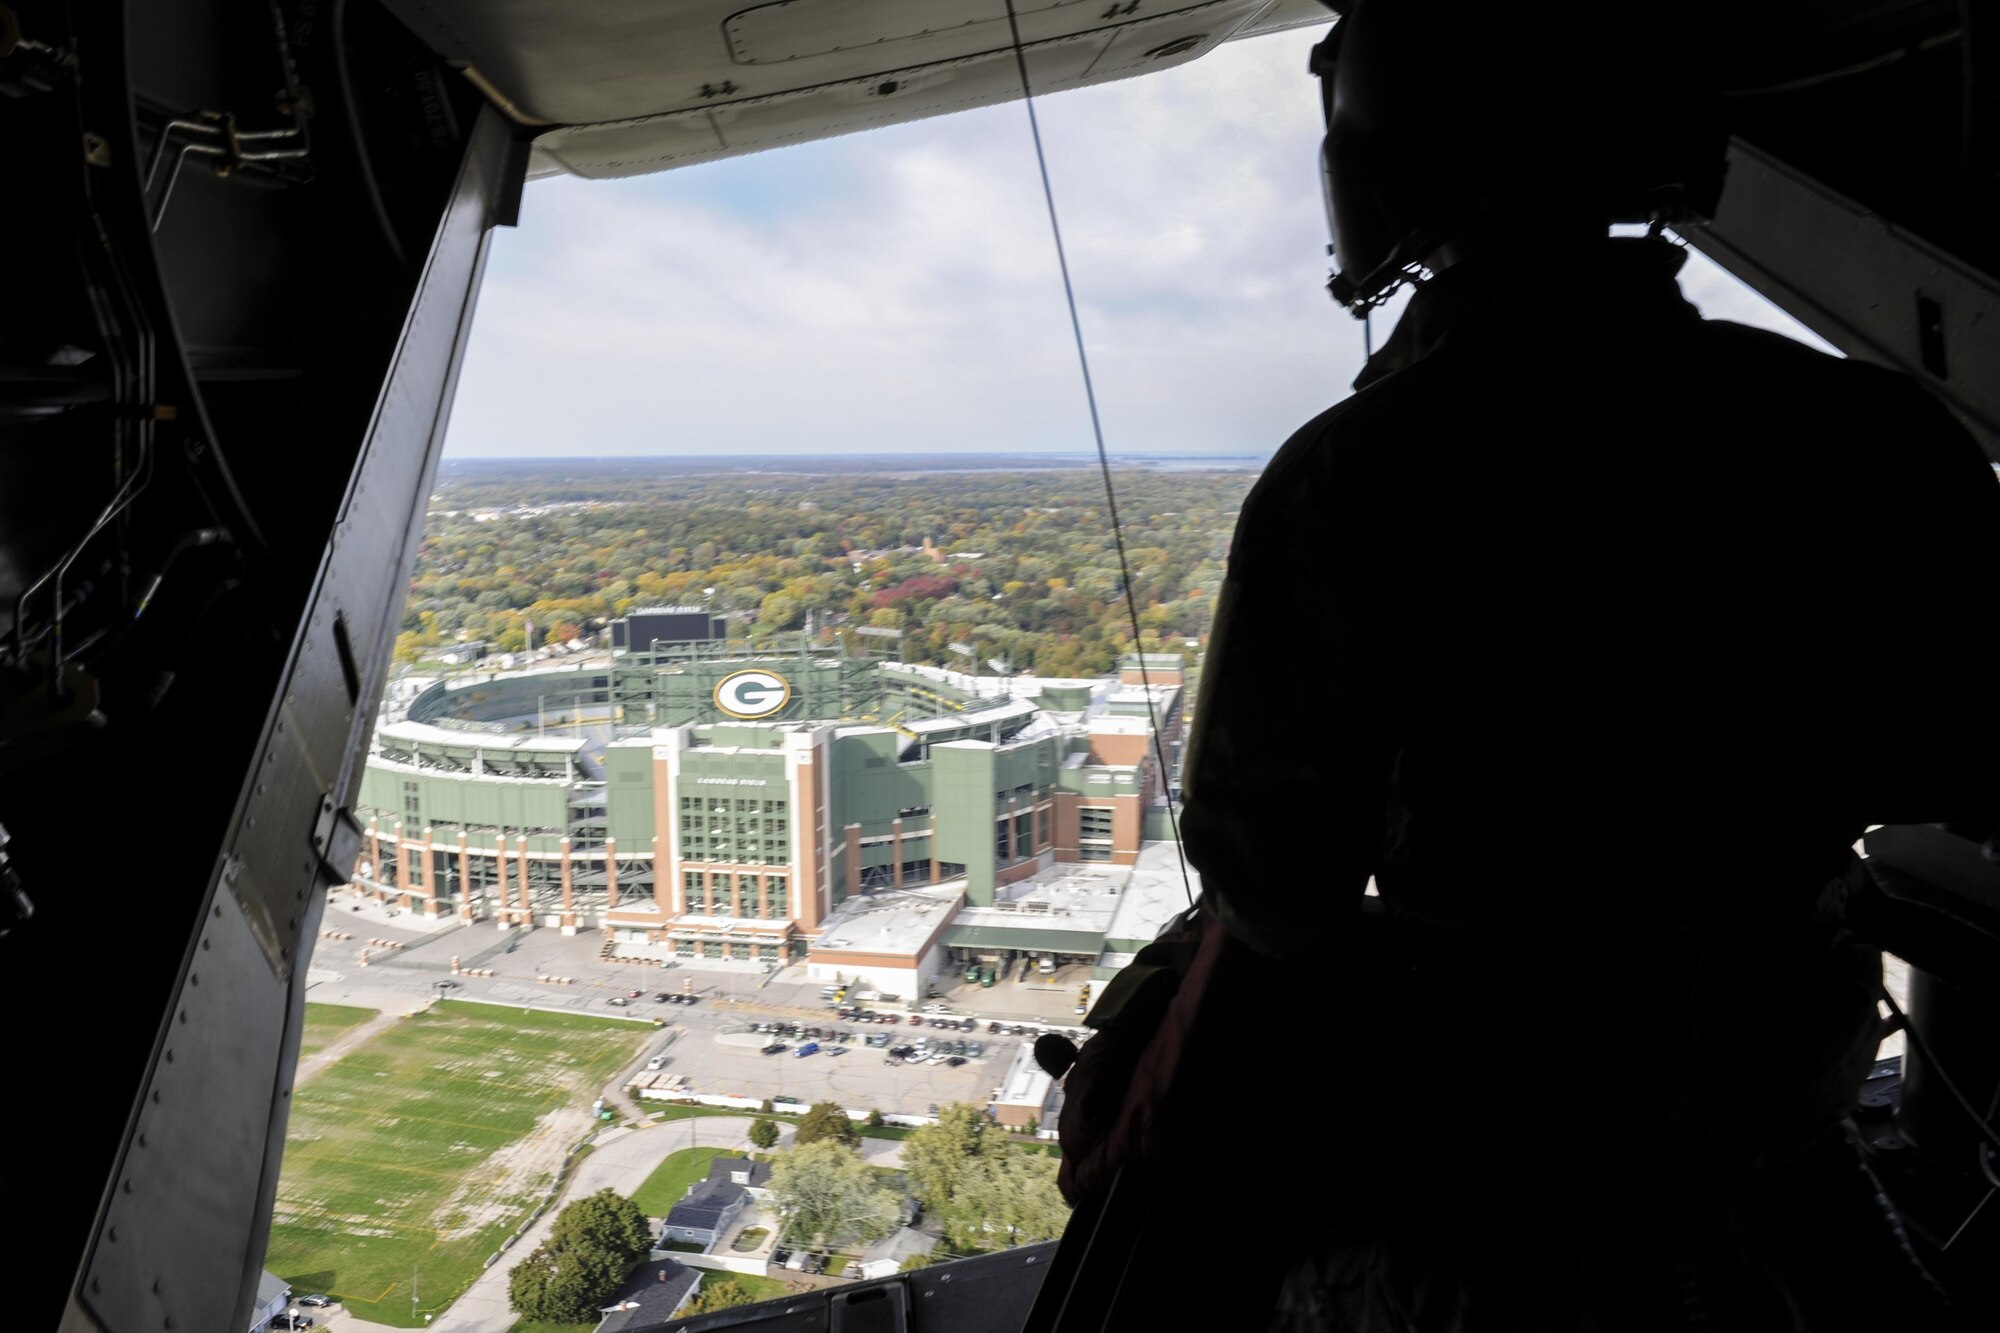 Staff Sgt. Dustin Trevino, a flight engineer with the 8th Special Operations Squadron, looks at Lambeau Field from a CV-22 Osprey tiltrotor aircraft over Green Bay, Wis., Oct. 14, 2016. The 8th SOS visited the Milwaukee-Green Bay area for a flyover above Lambeau Field Oct. 16 during the Green Bay versus Dallas NFL game. The Osprey offers increased speed and range over other rotary-wing aircraft, enabling Air Force Special Operations Command aircrews to execute long-range special operations missions. (U.S. Air Force photo by Airman 1st Class Joseph Pick)